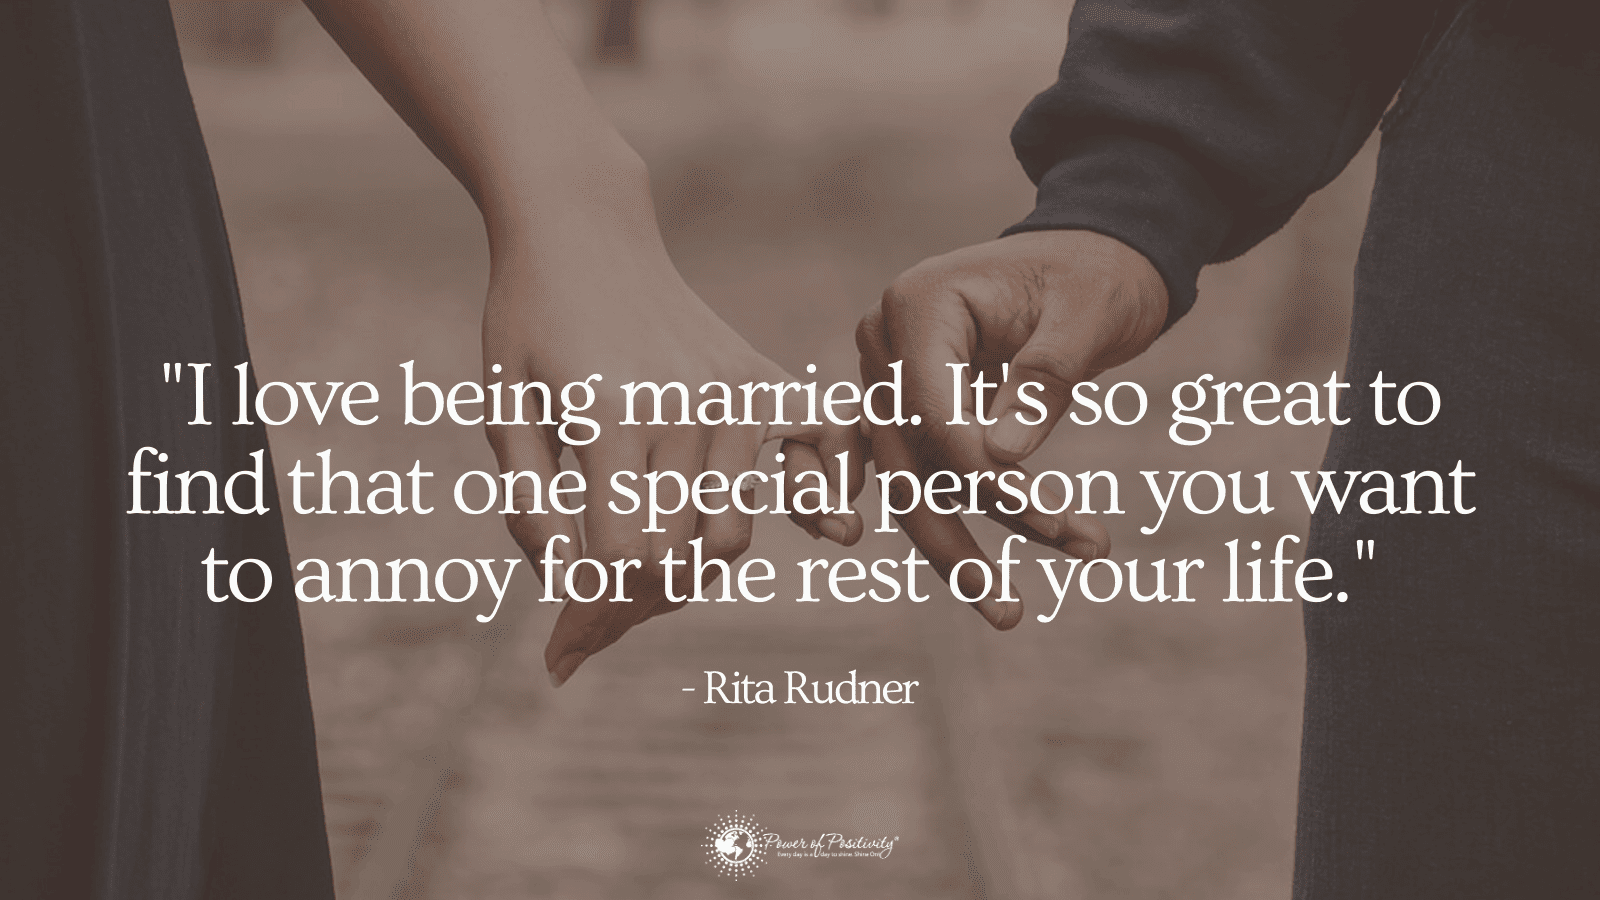 15 Humorous Quotes on Marriage | 5 Minute Read